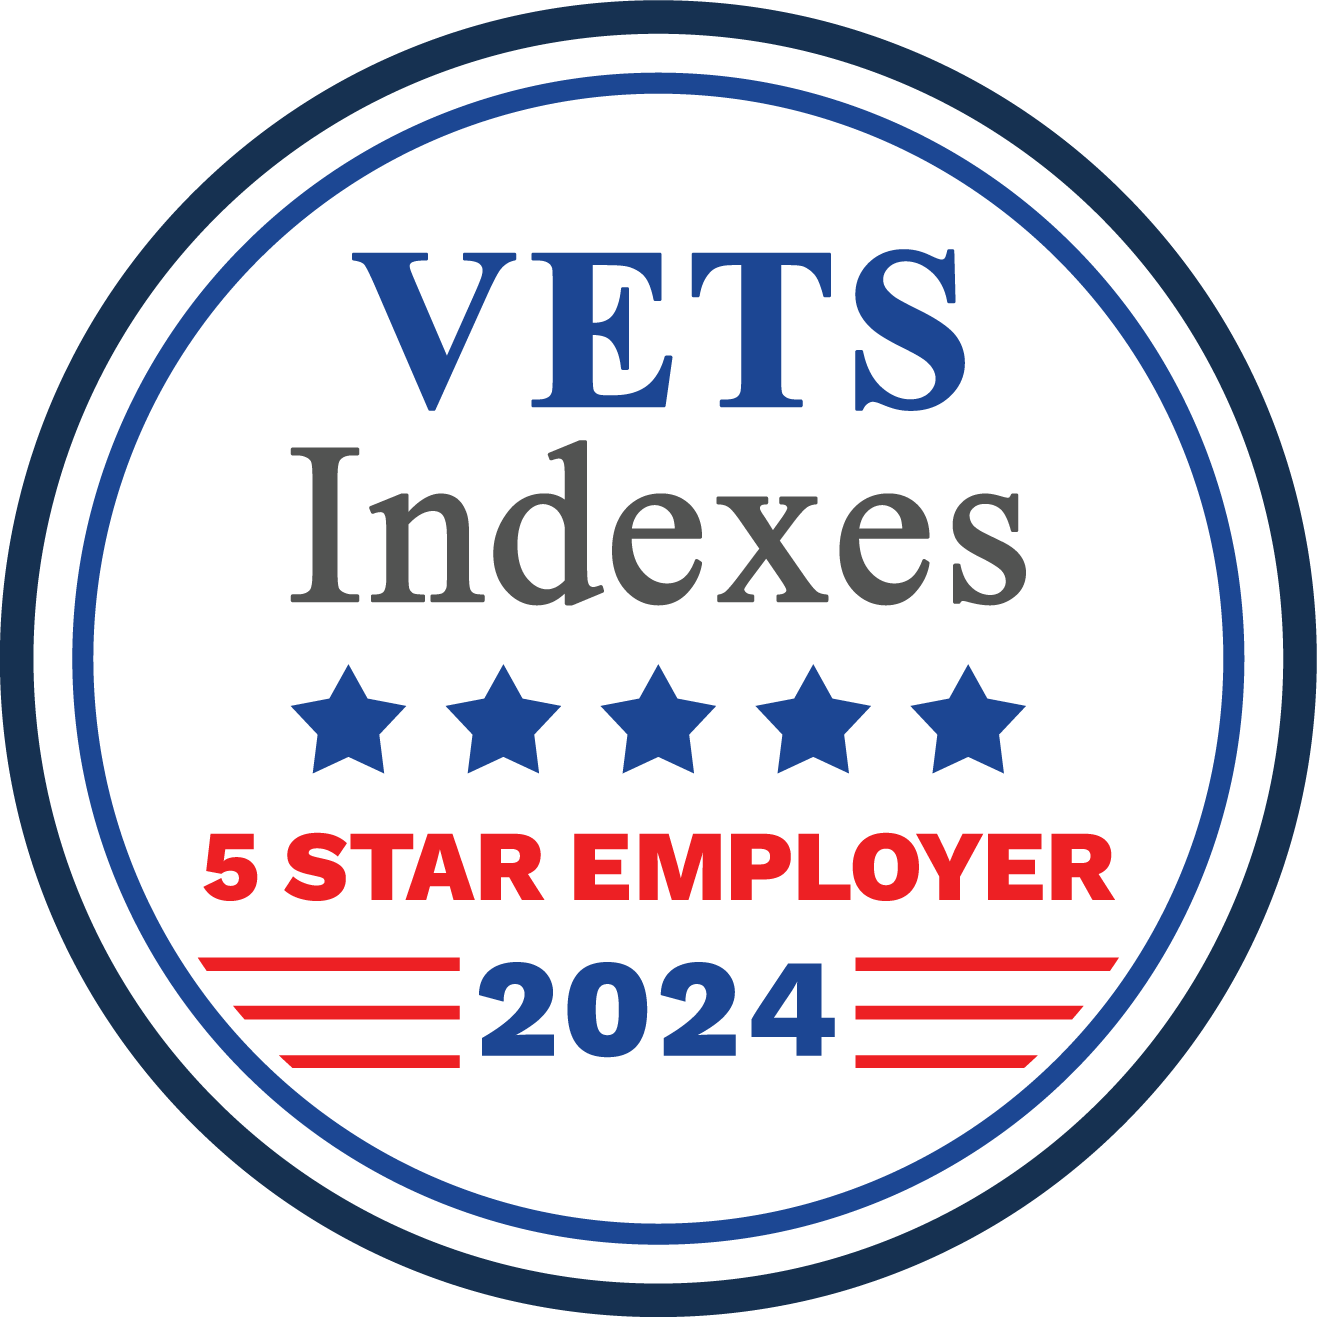 VETS Indexes 5 Stat Employer 2024